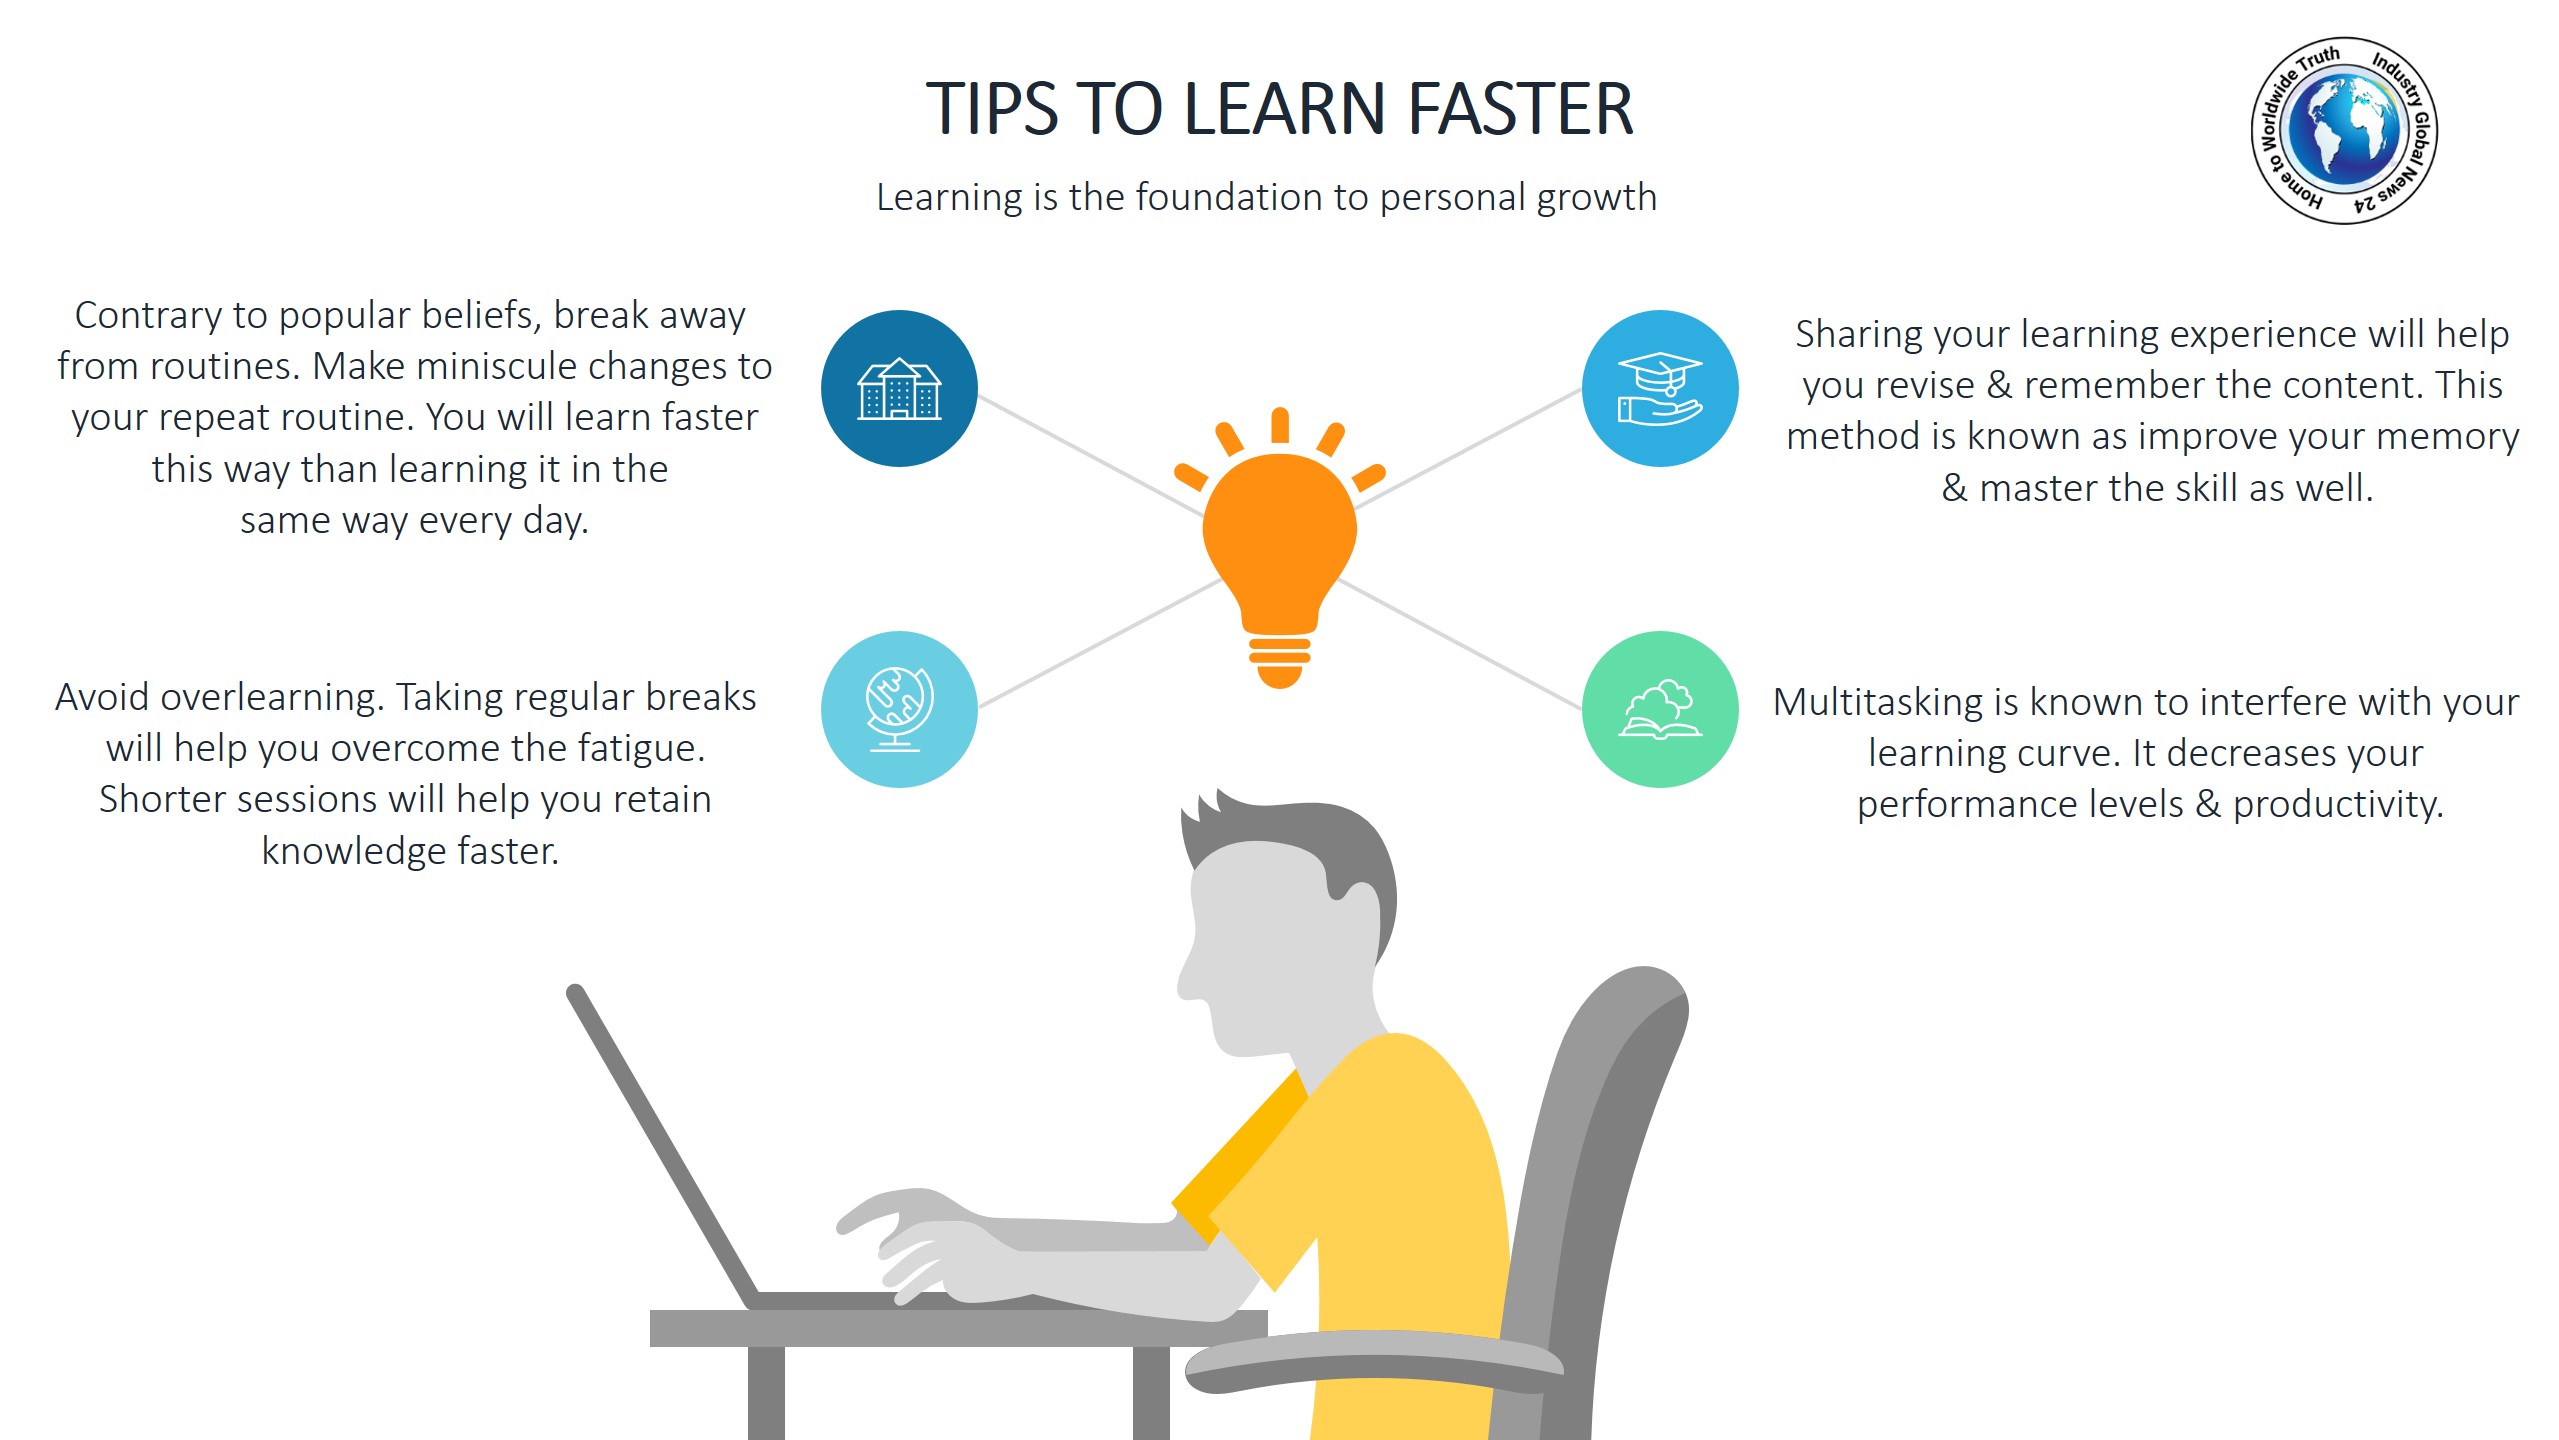 Tips to learn faster